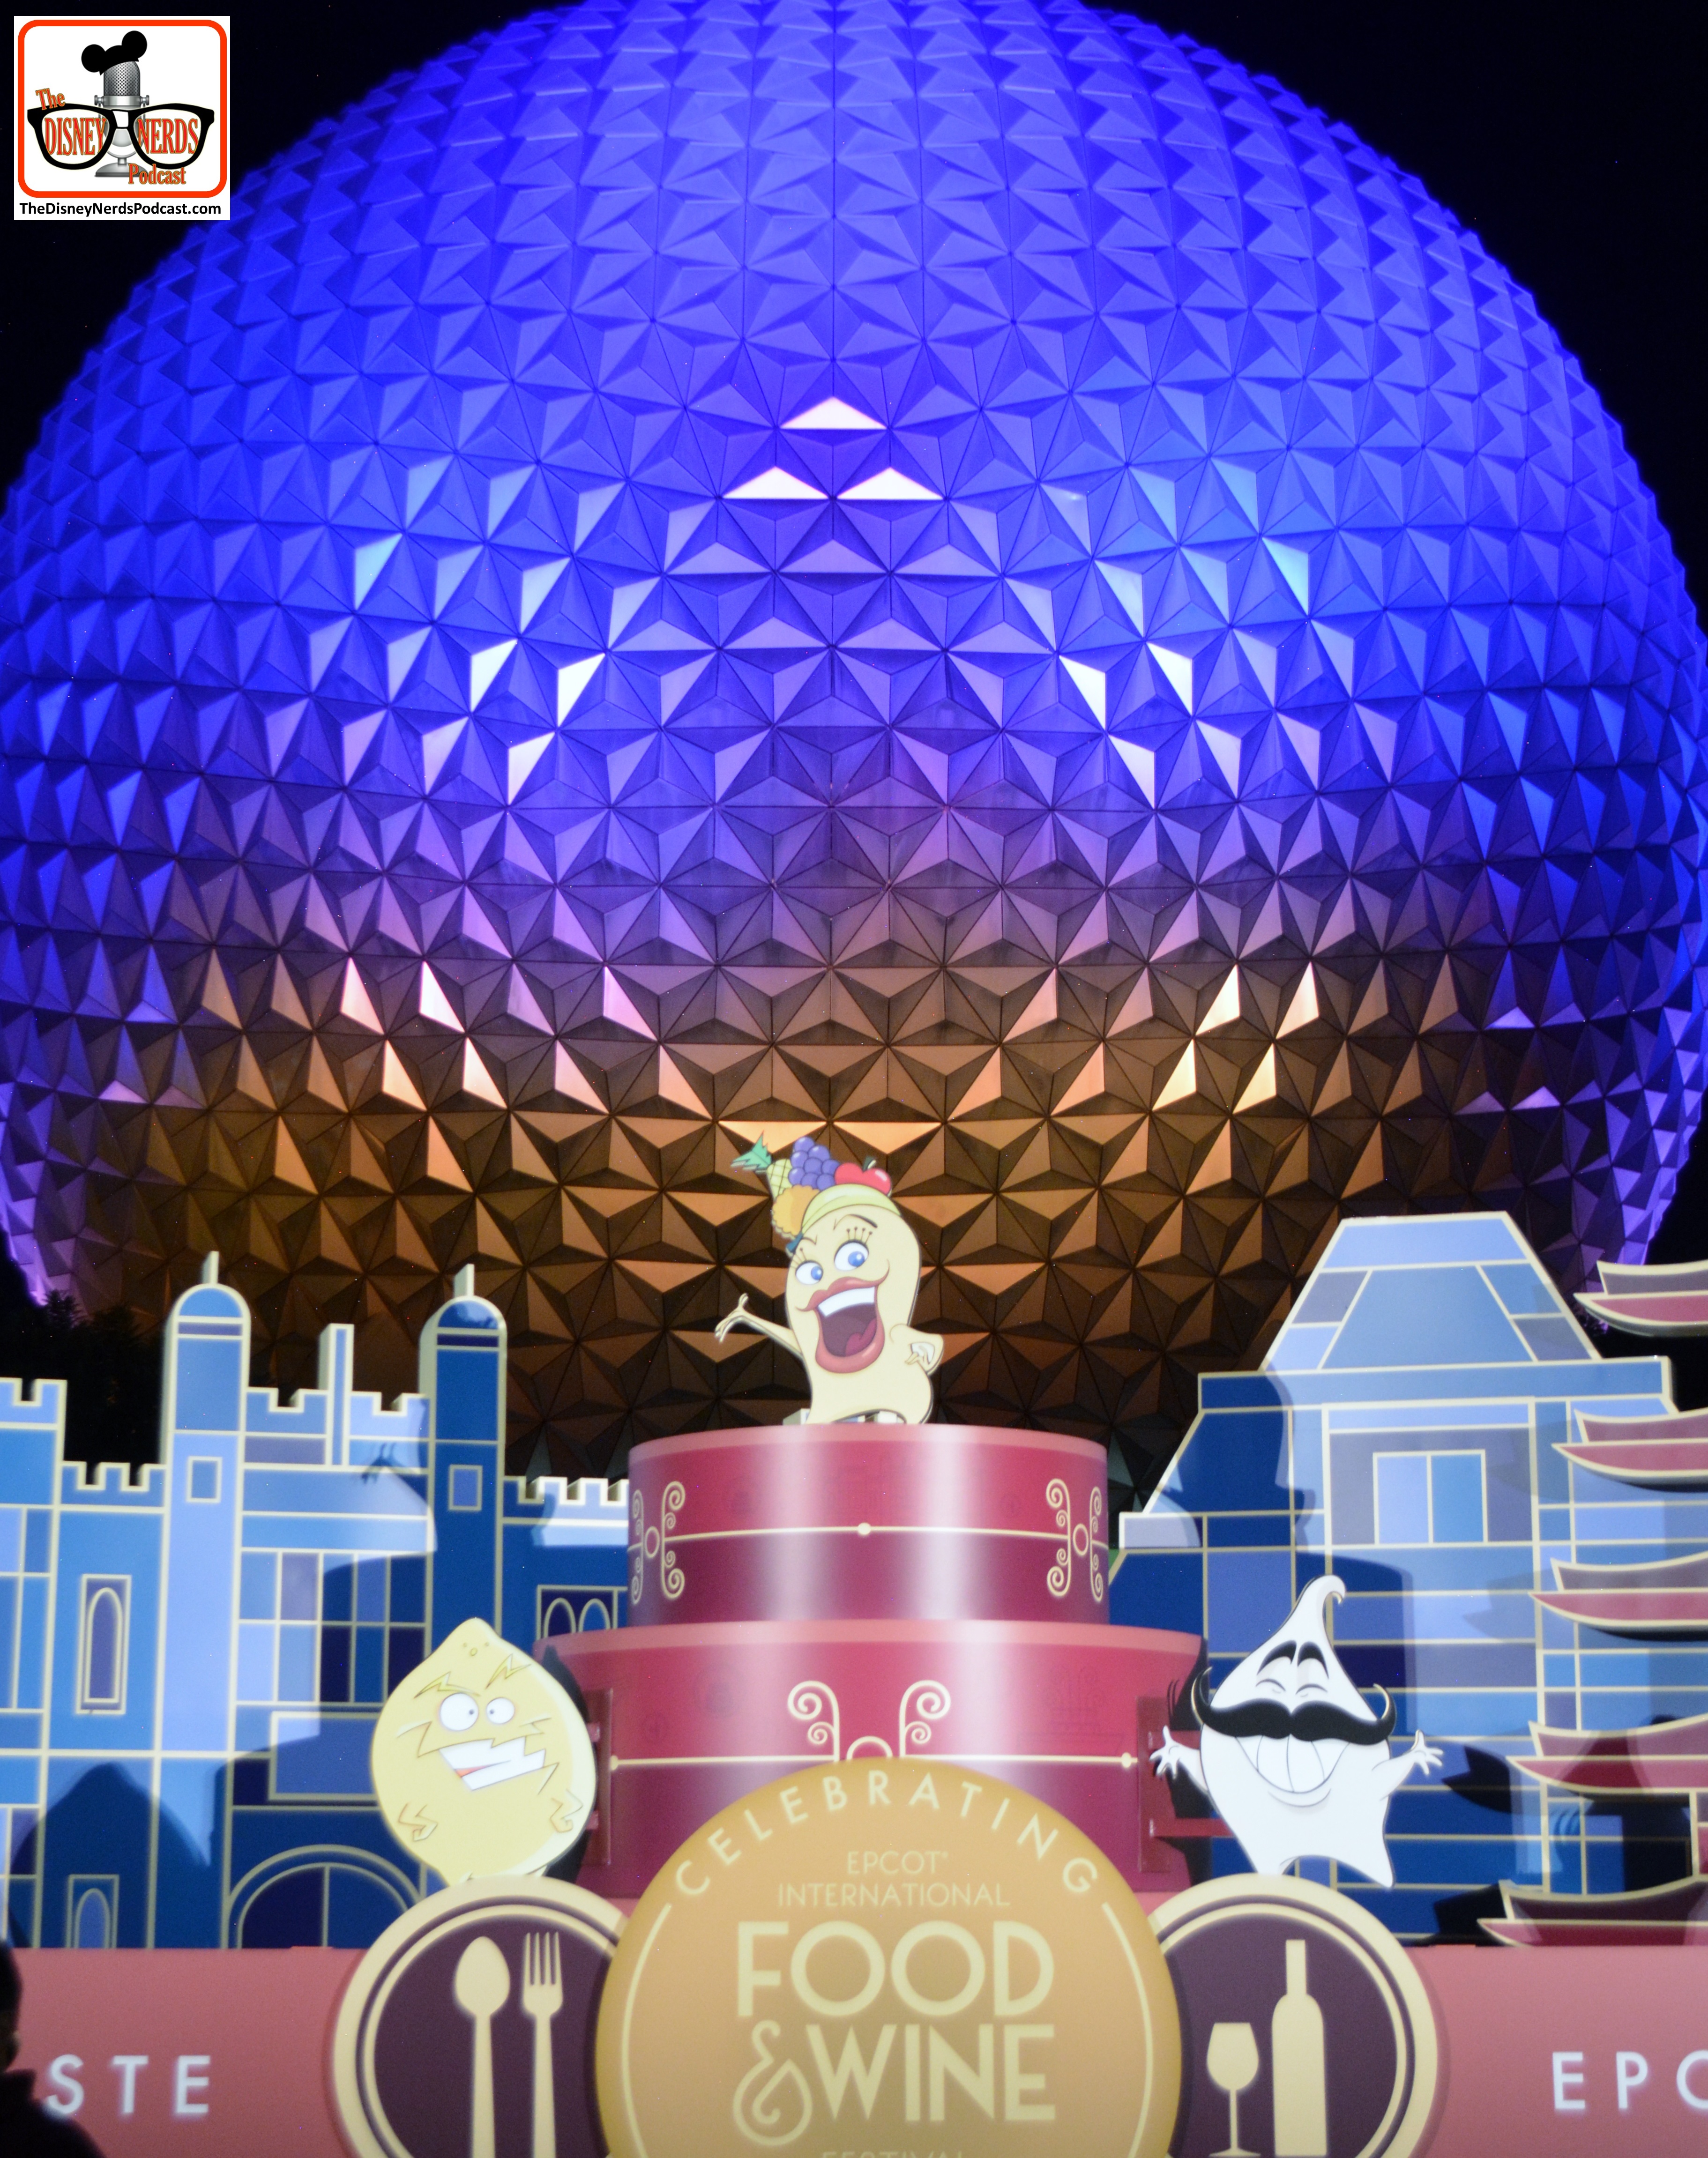 Epcot is set for Food and Wine - Celebrating 20 years.